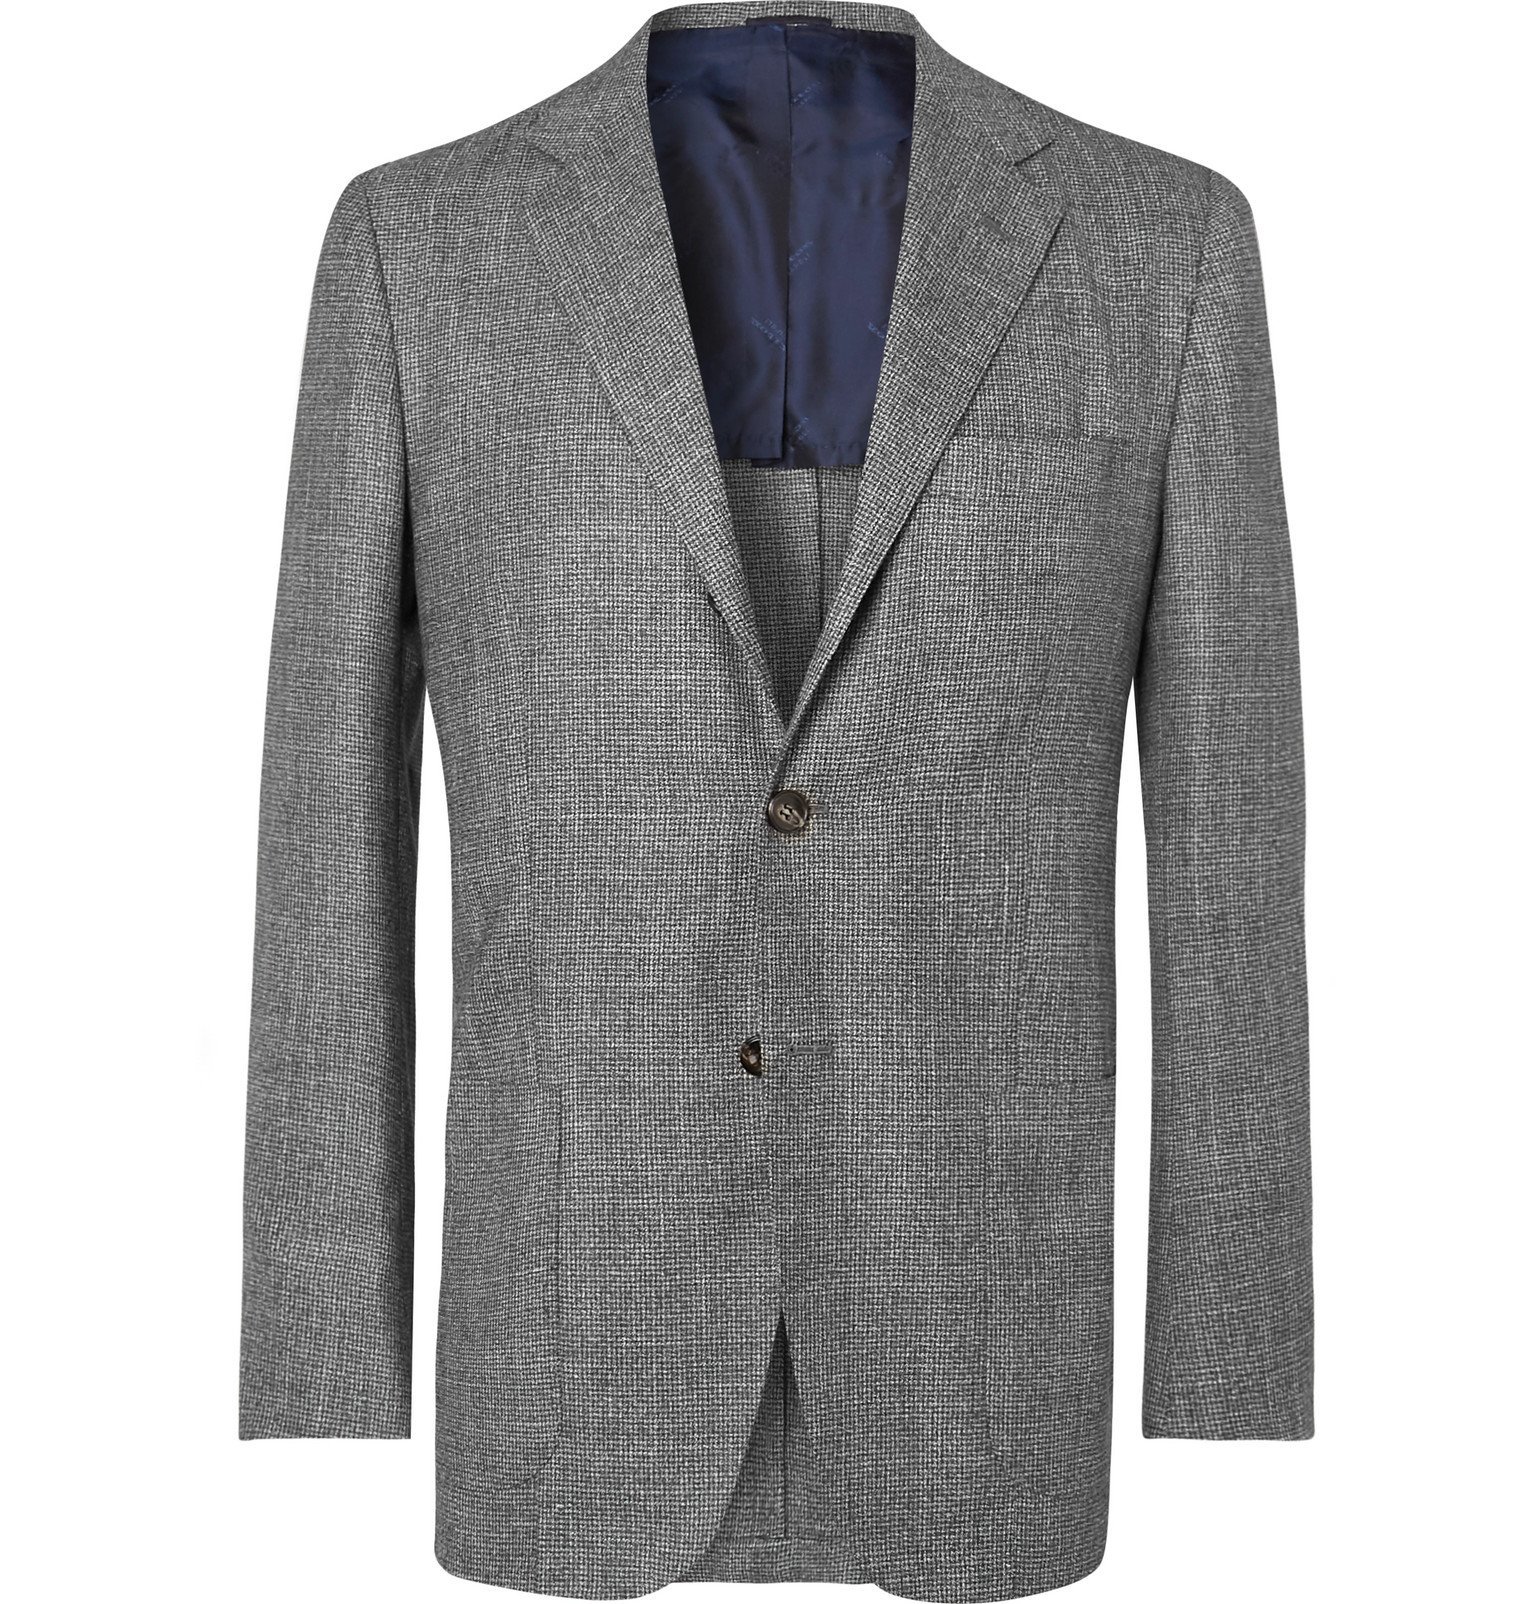 Kiton - Grey Slim-Fit Unstructured Micro-Puppytooth Cashmere, Linen and ...